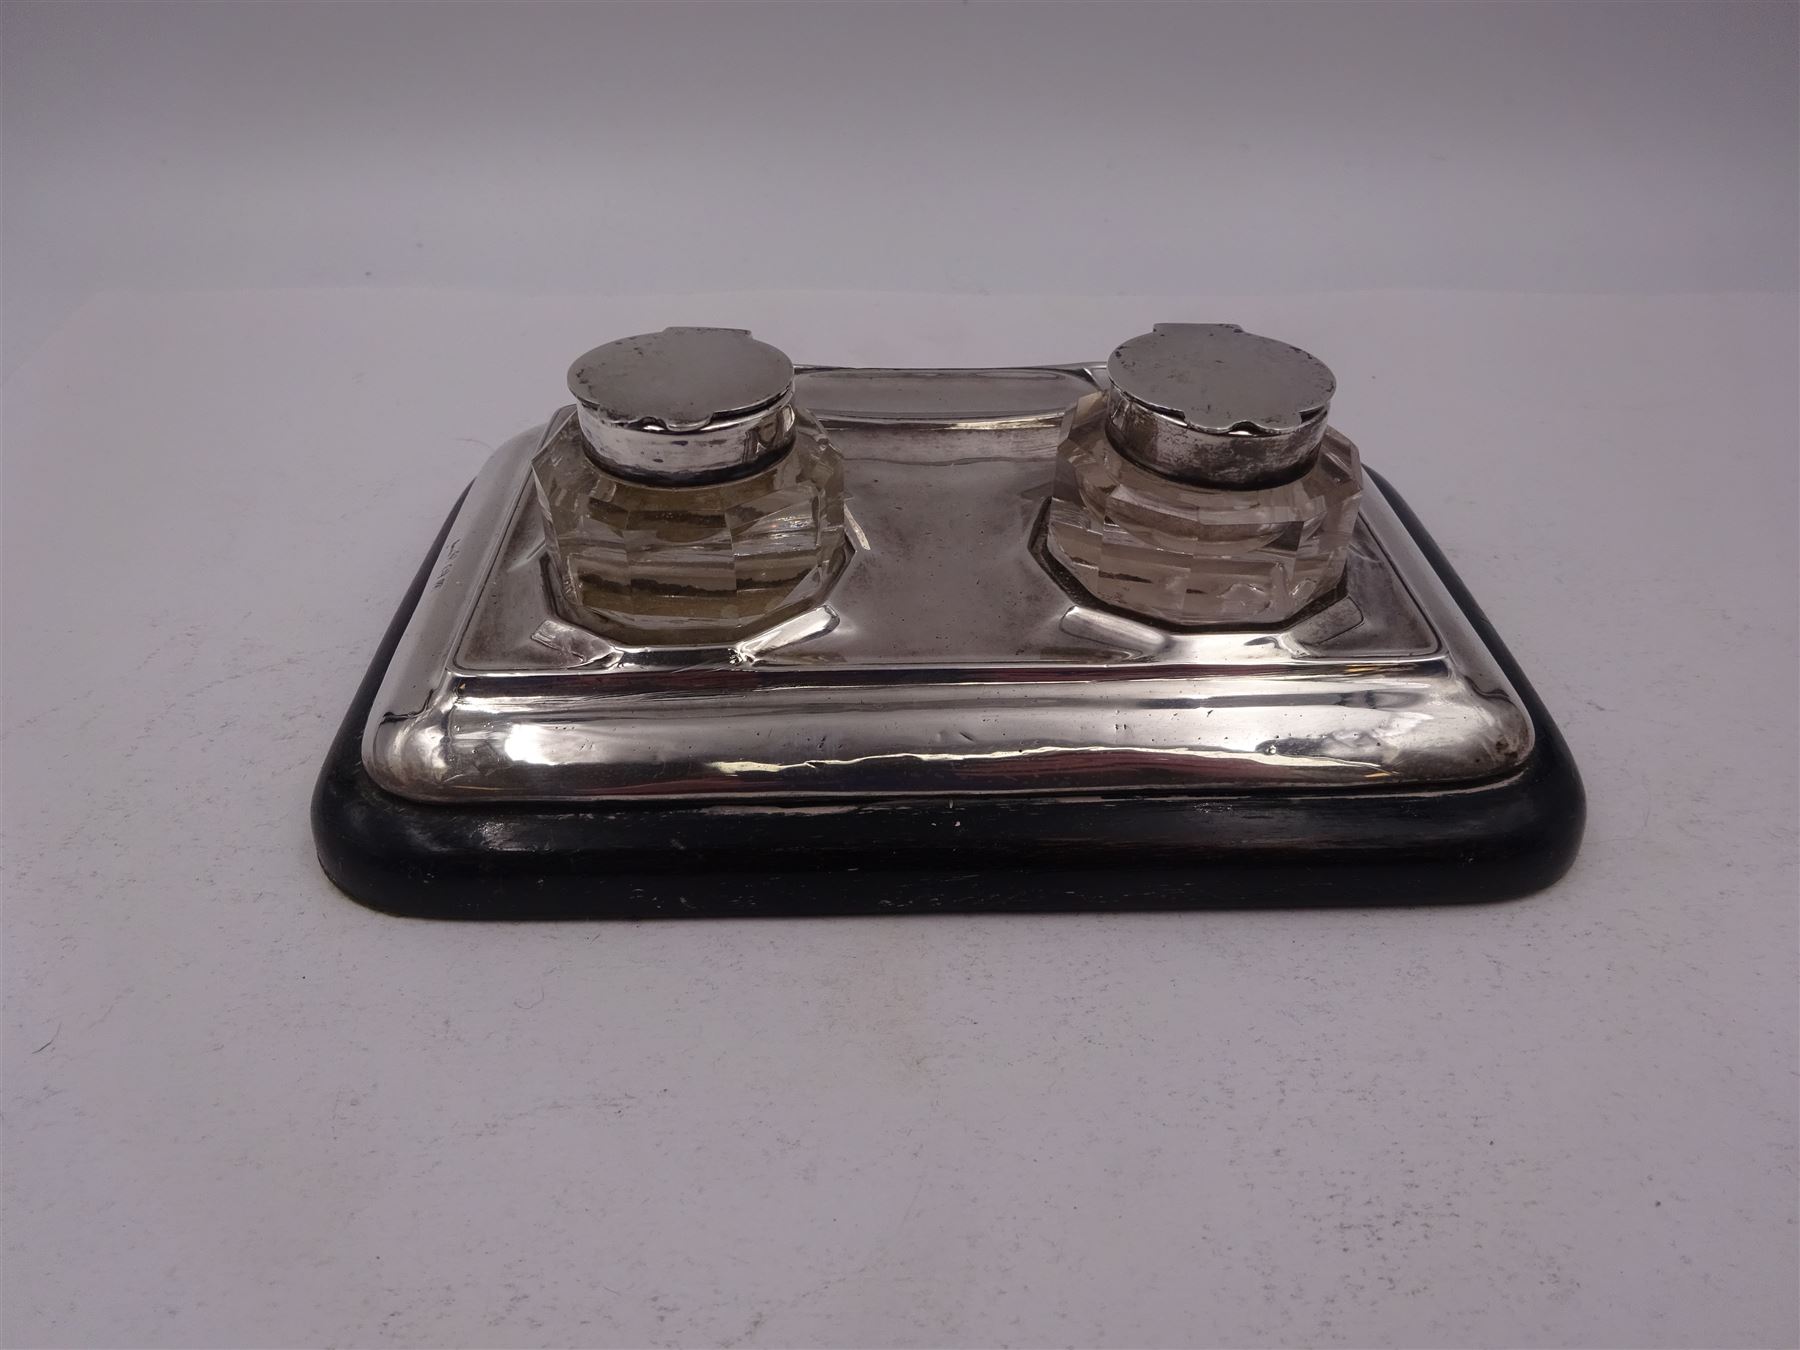 1920s silver desk stand - Image 2 of 4